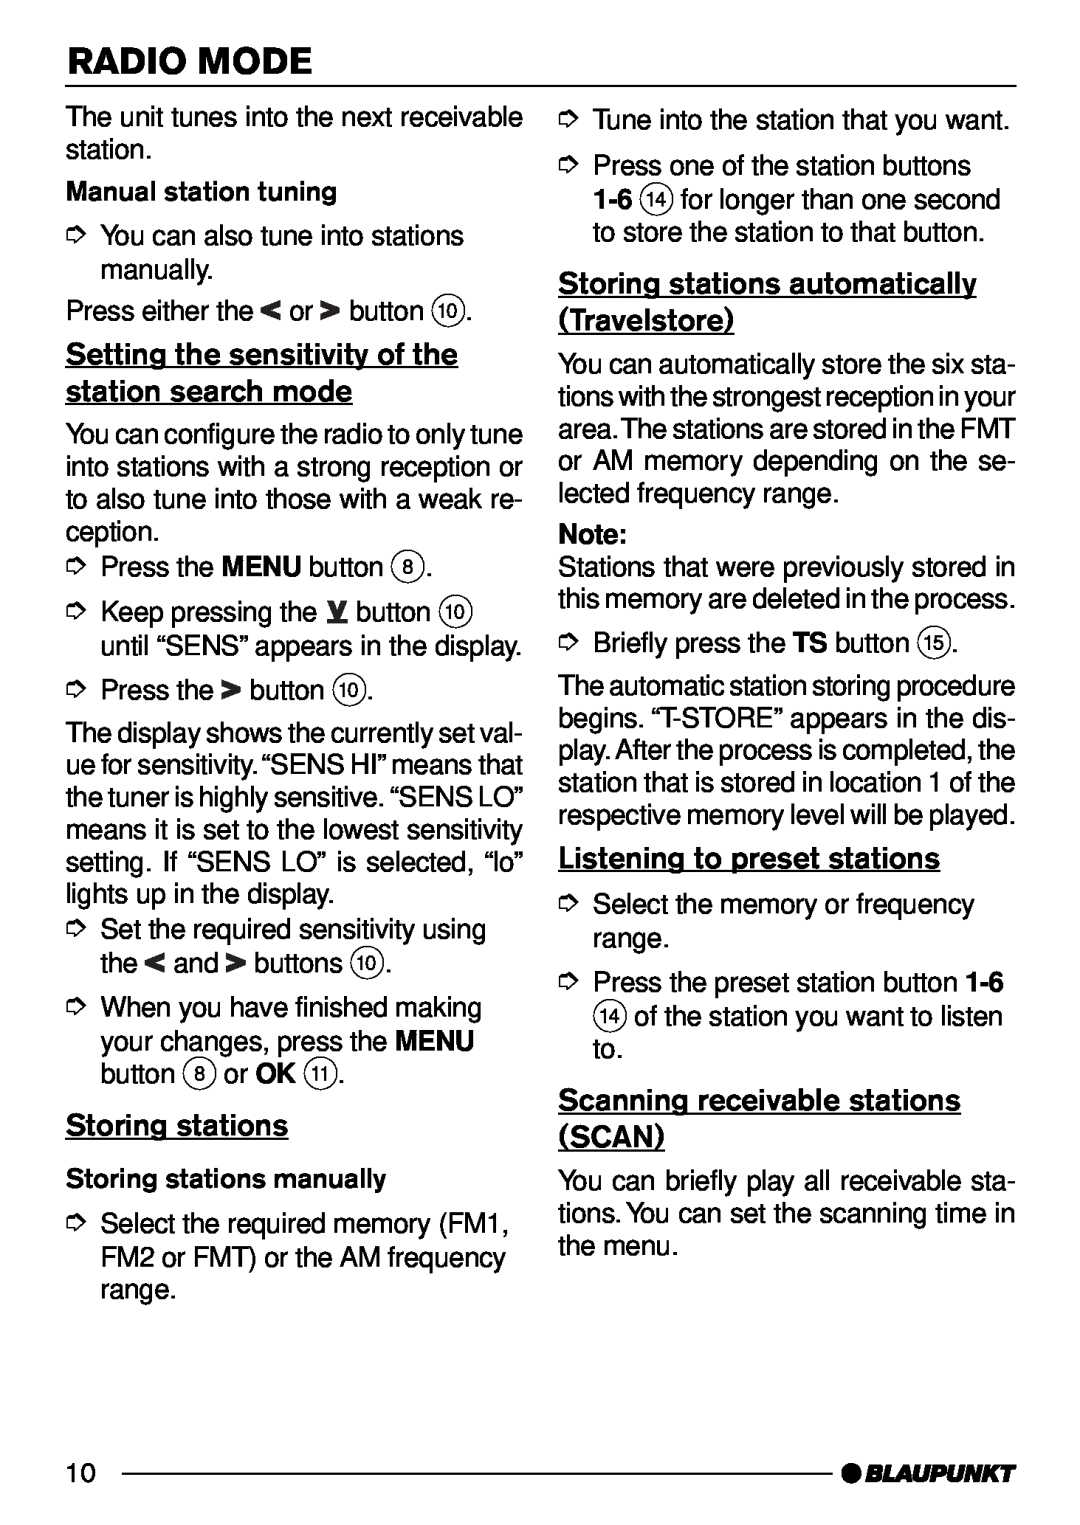 Blaupunkt C50 operating instructions Setting the sensitivity of the station search mode, Storing stations, Radio Mode 